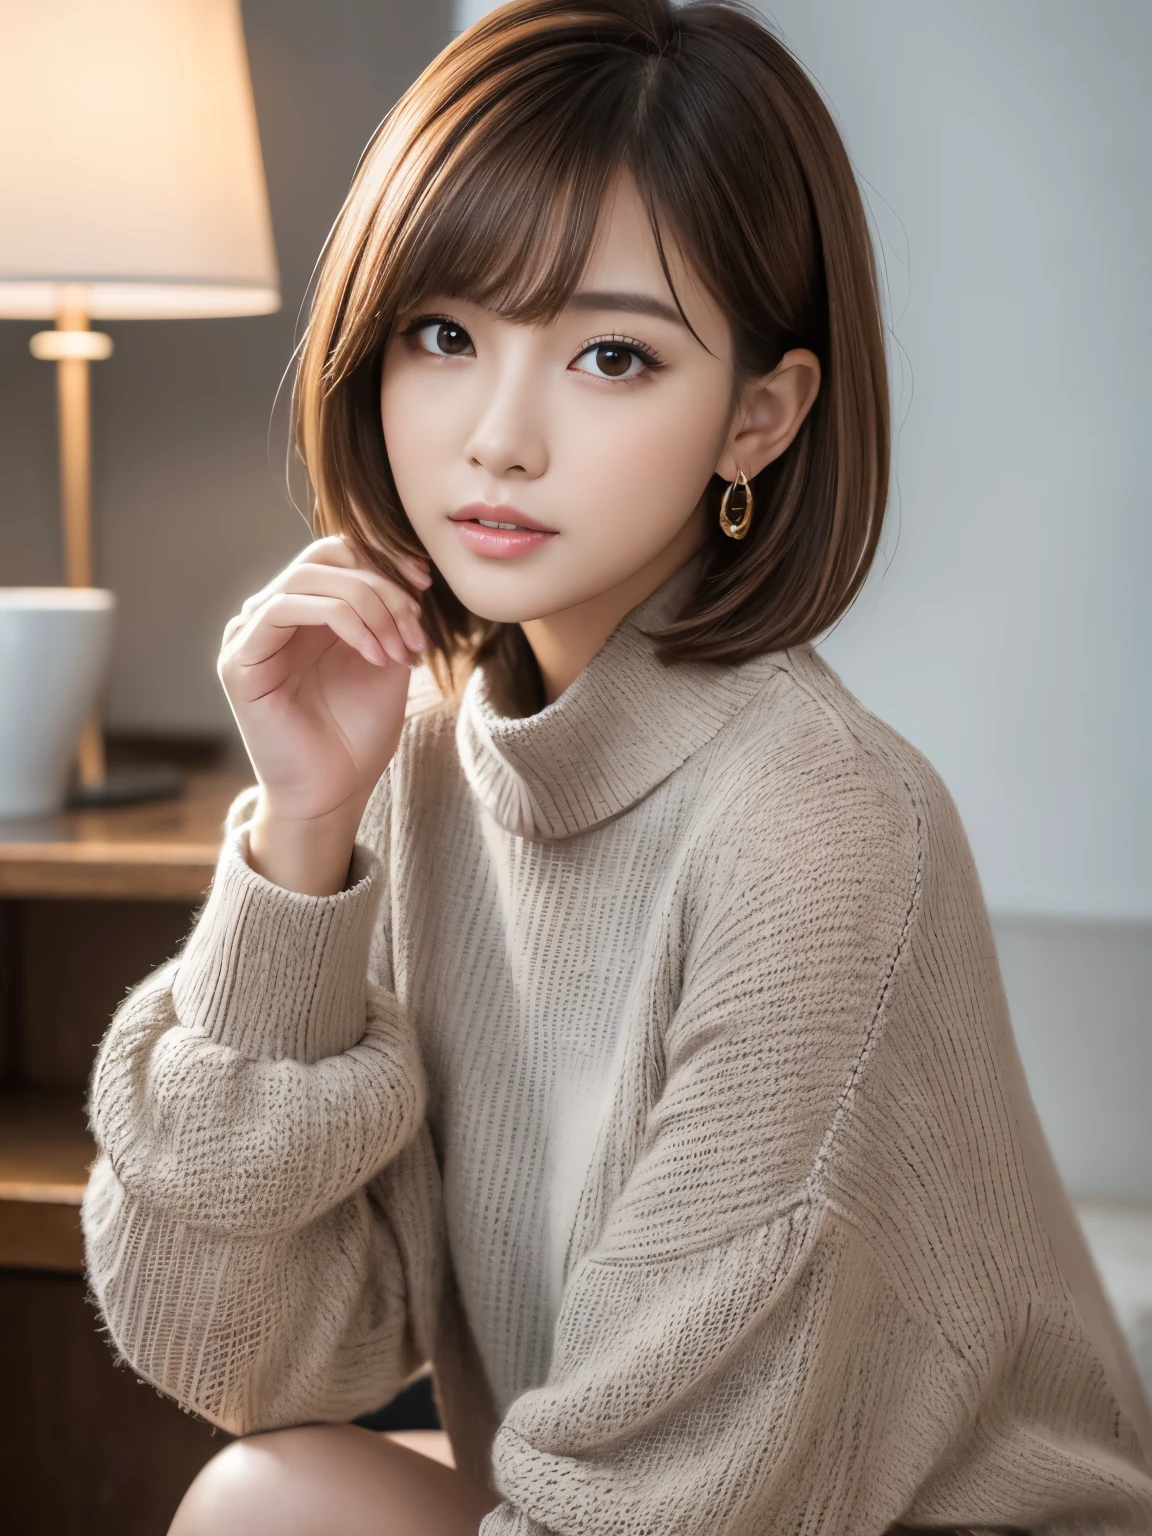 Ultra High Definition, Superior Quality, Premier Quality, ultra detailed, Photorealistic, 8k, RAW Photos, highest quality, masterpiece, Attractive Young girl, Angelic girl, Brown Hair, Korean idol, Short Hair, Mesh Hair, glossy lips, natural makeup, Japanese Idol, Sophisticated, Stylish, model posing, gray knit, 